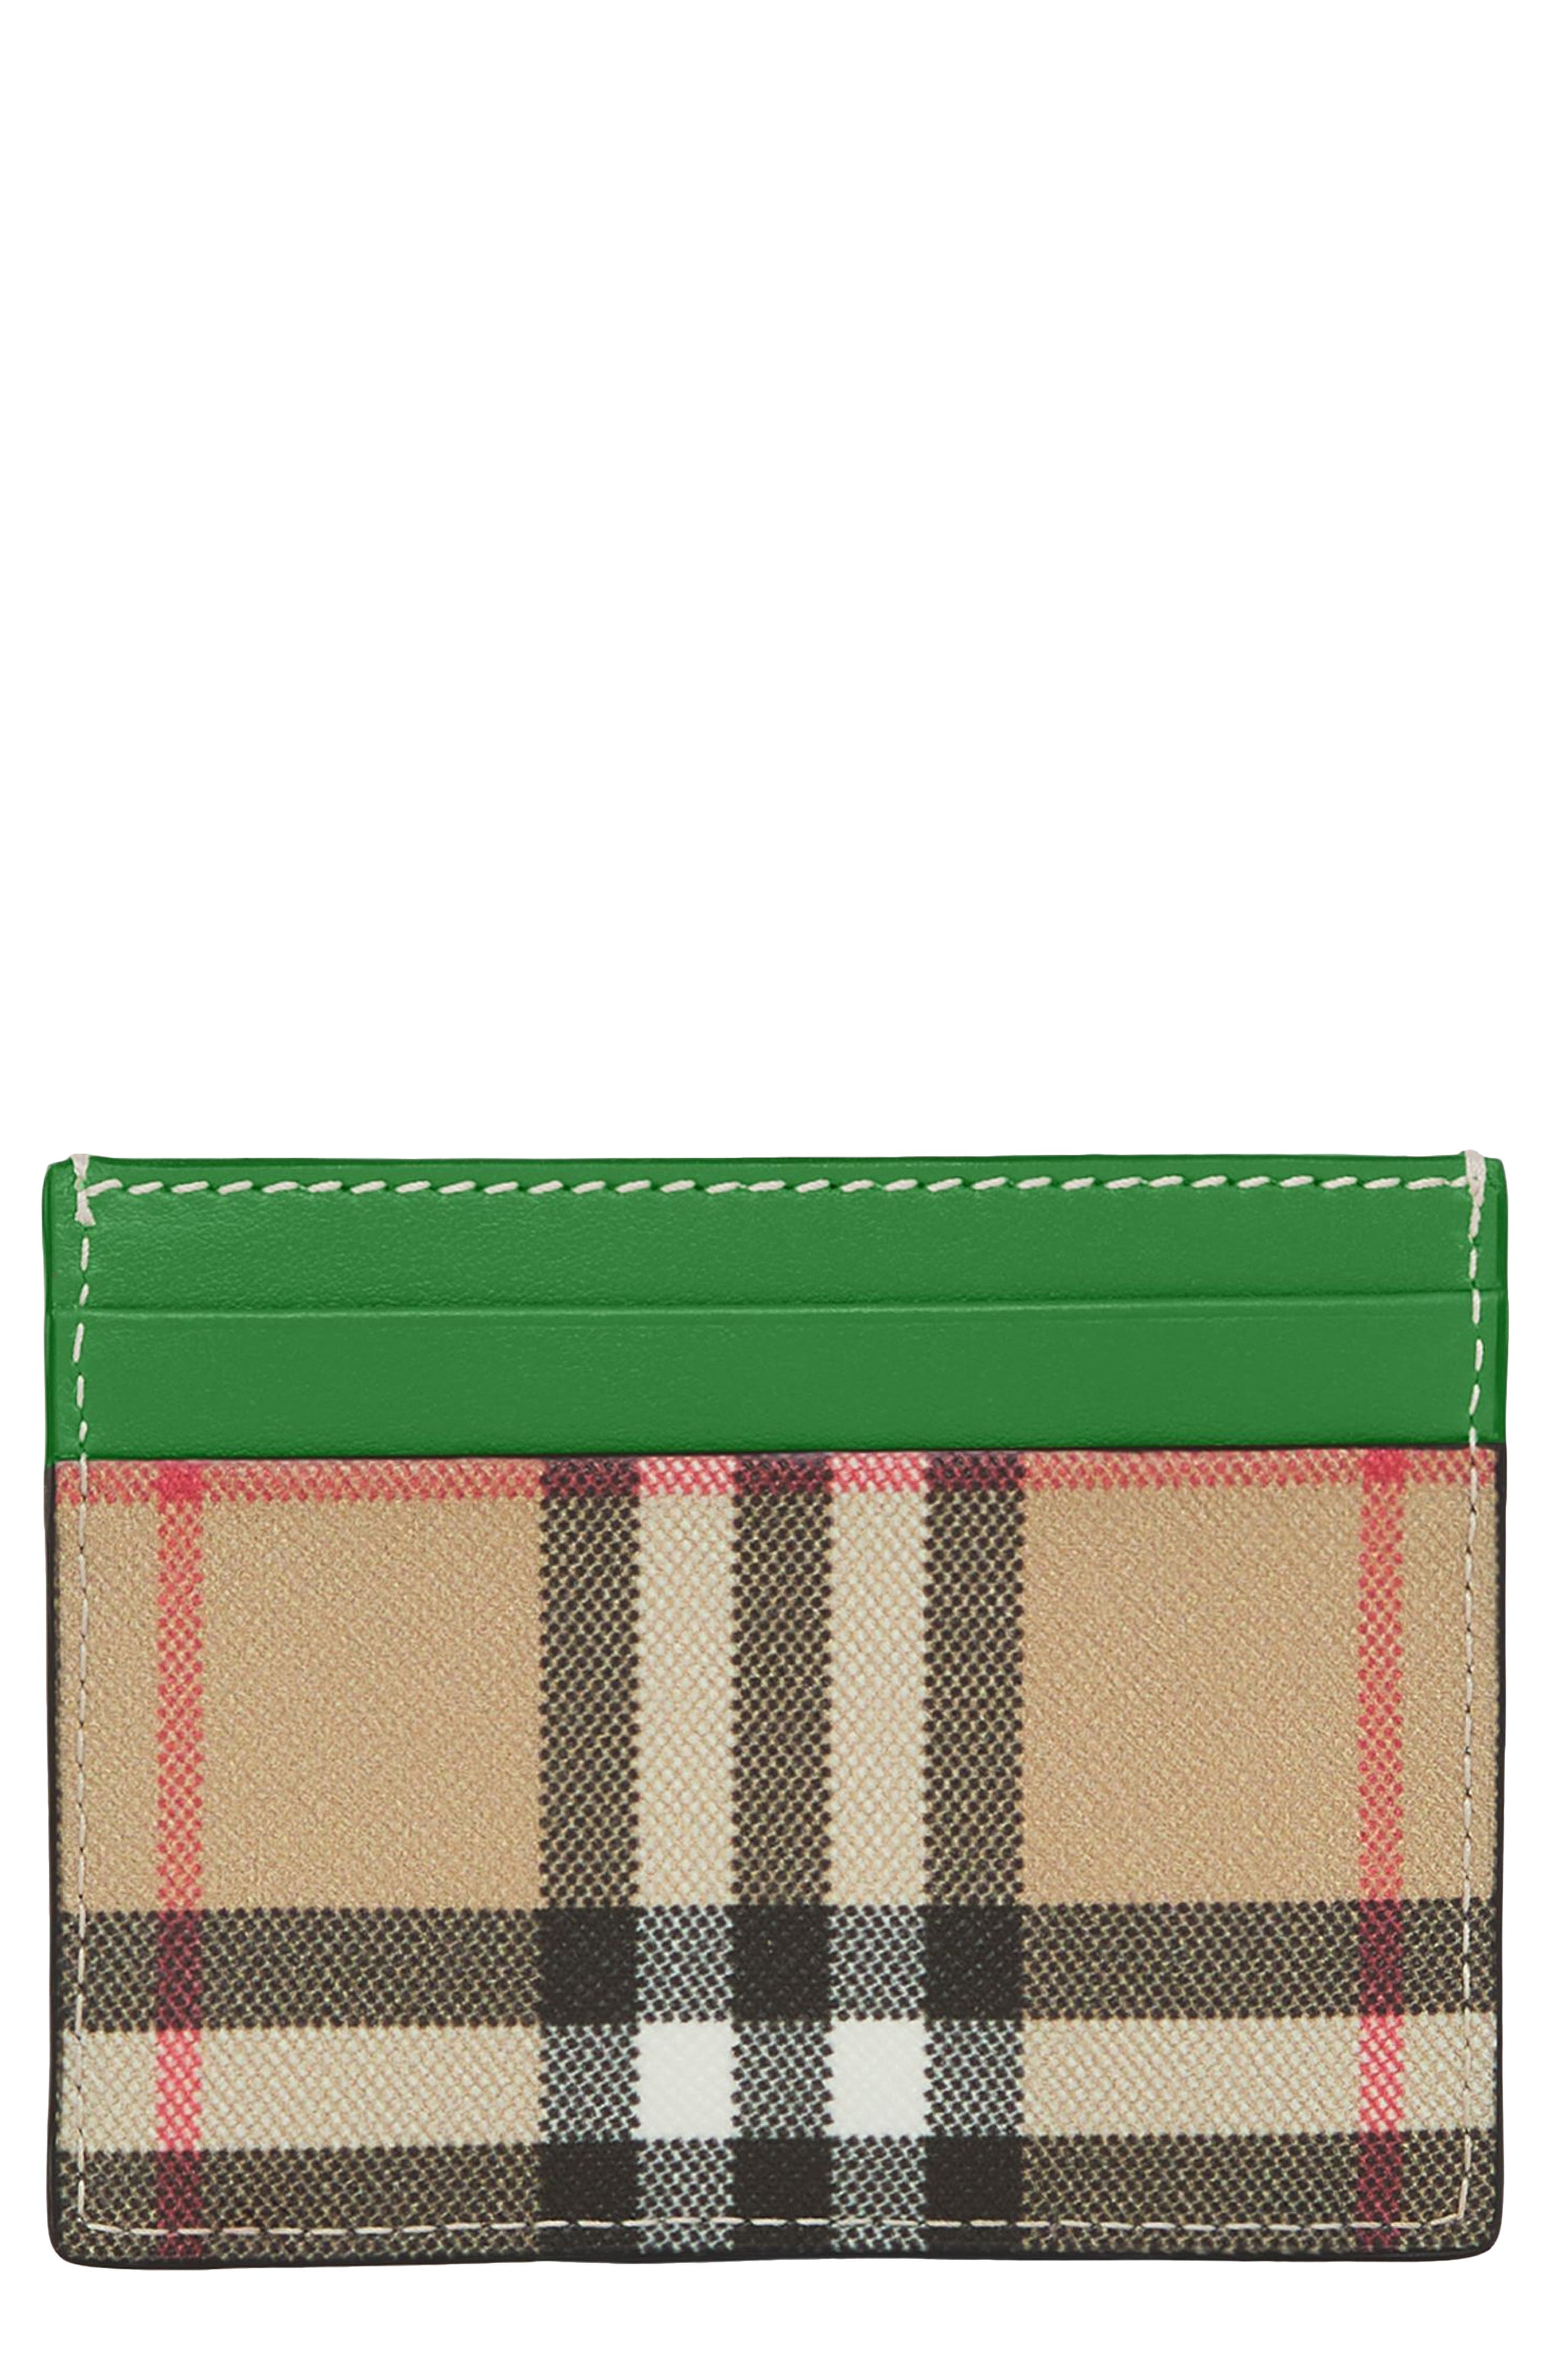 Burberry Sandon Check Canvas & Leather Card Case in Ivy Green at Nordstrom